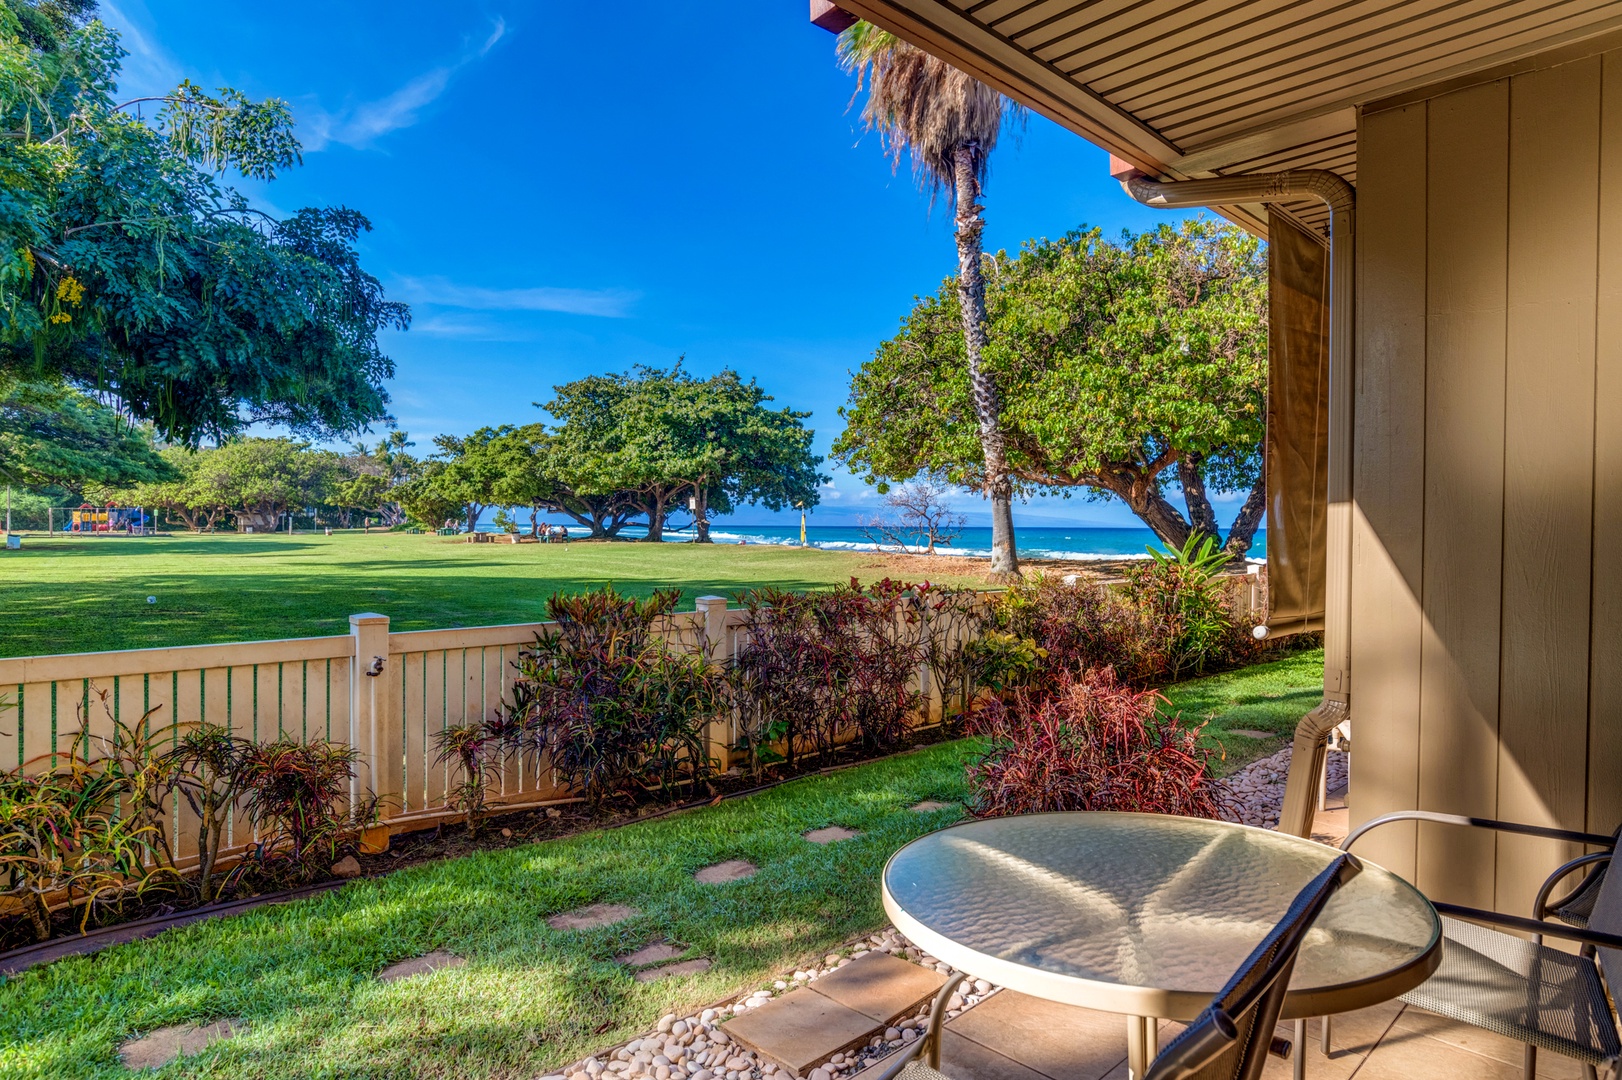 Lahaina Vacation Rentals, Hale Kai 109 - Less then 50 steps to the sand